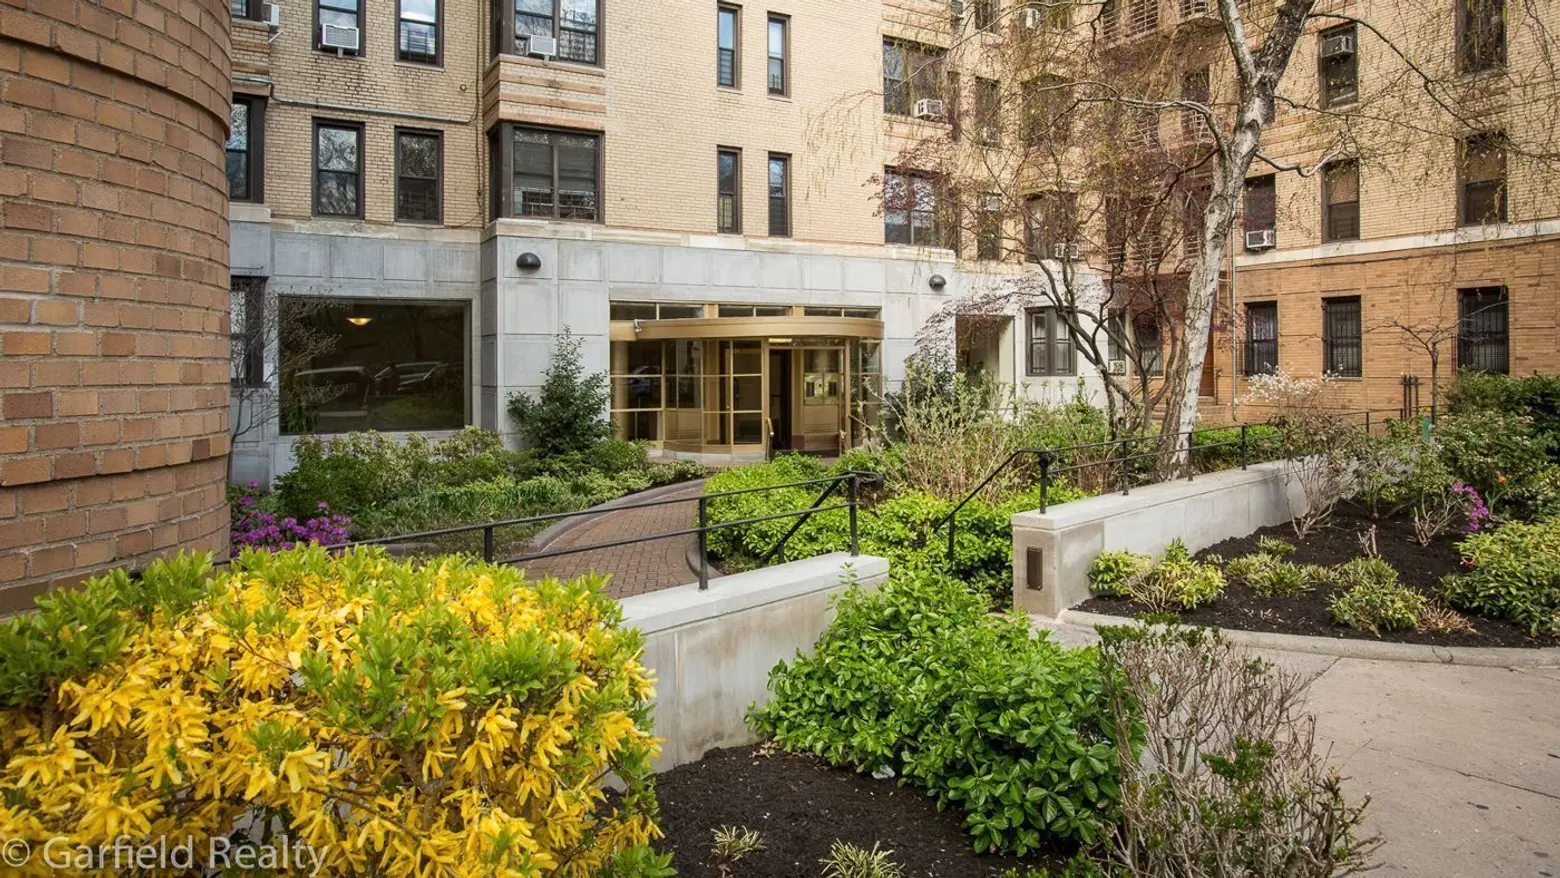 235 Lincoln Place, 20 Plaza Street East, Prospect Park, Prospect Heights, Brooklyn, Current Listings, co-op